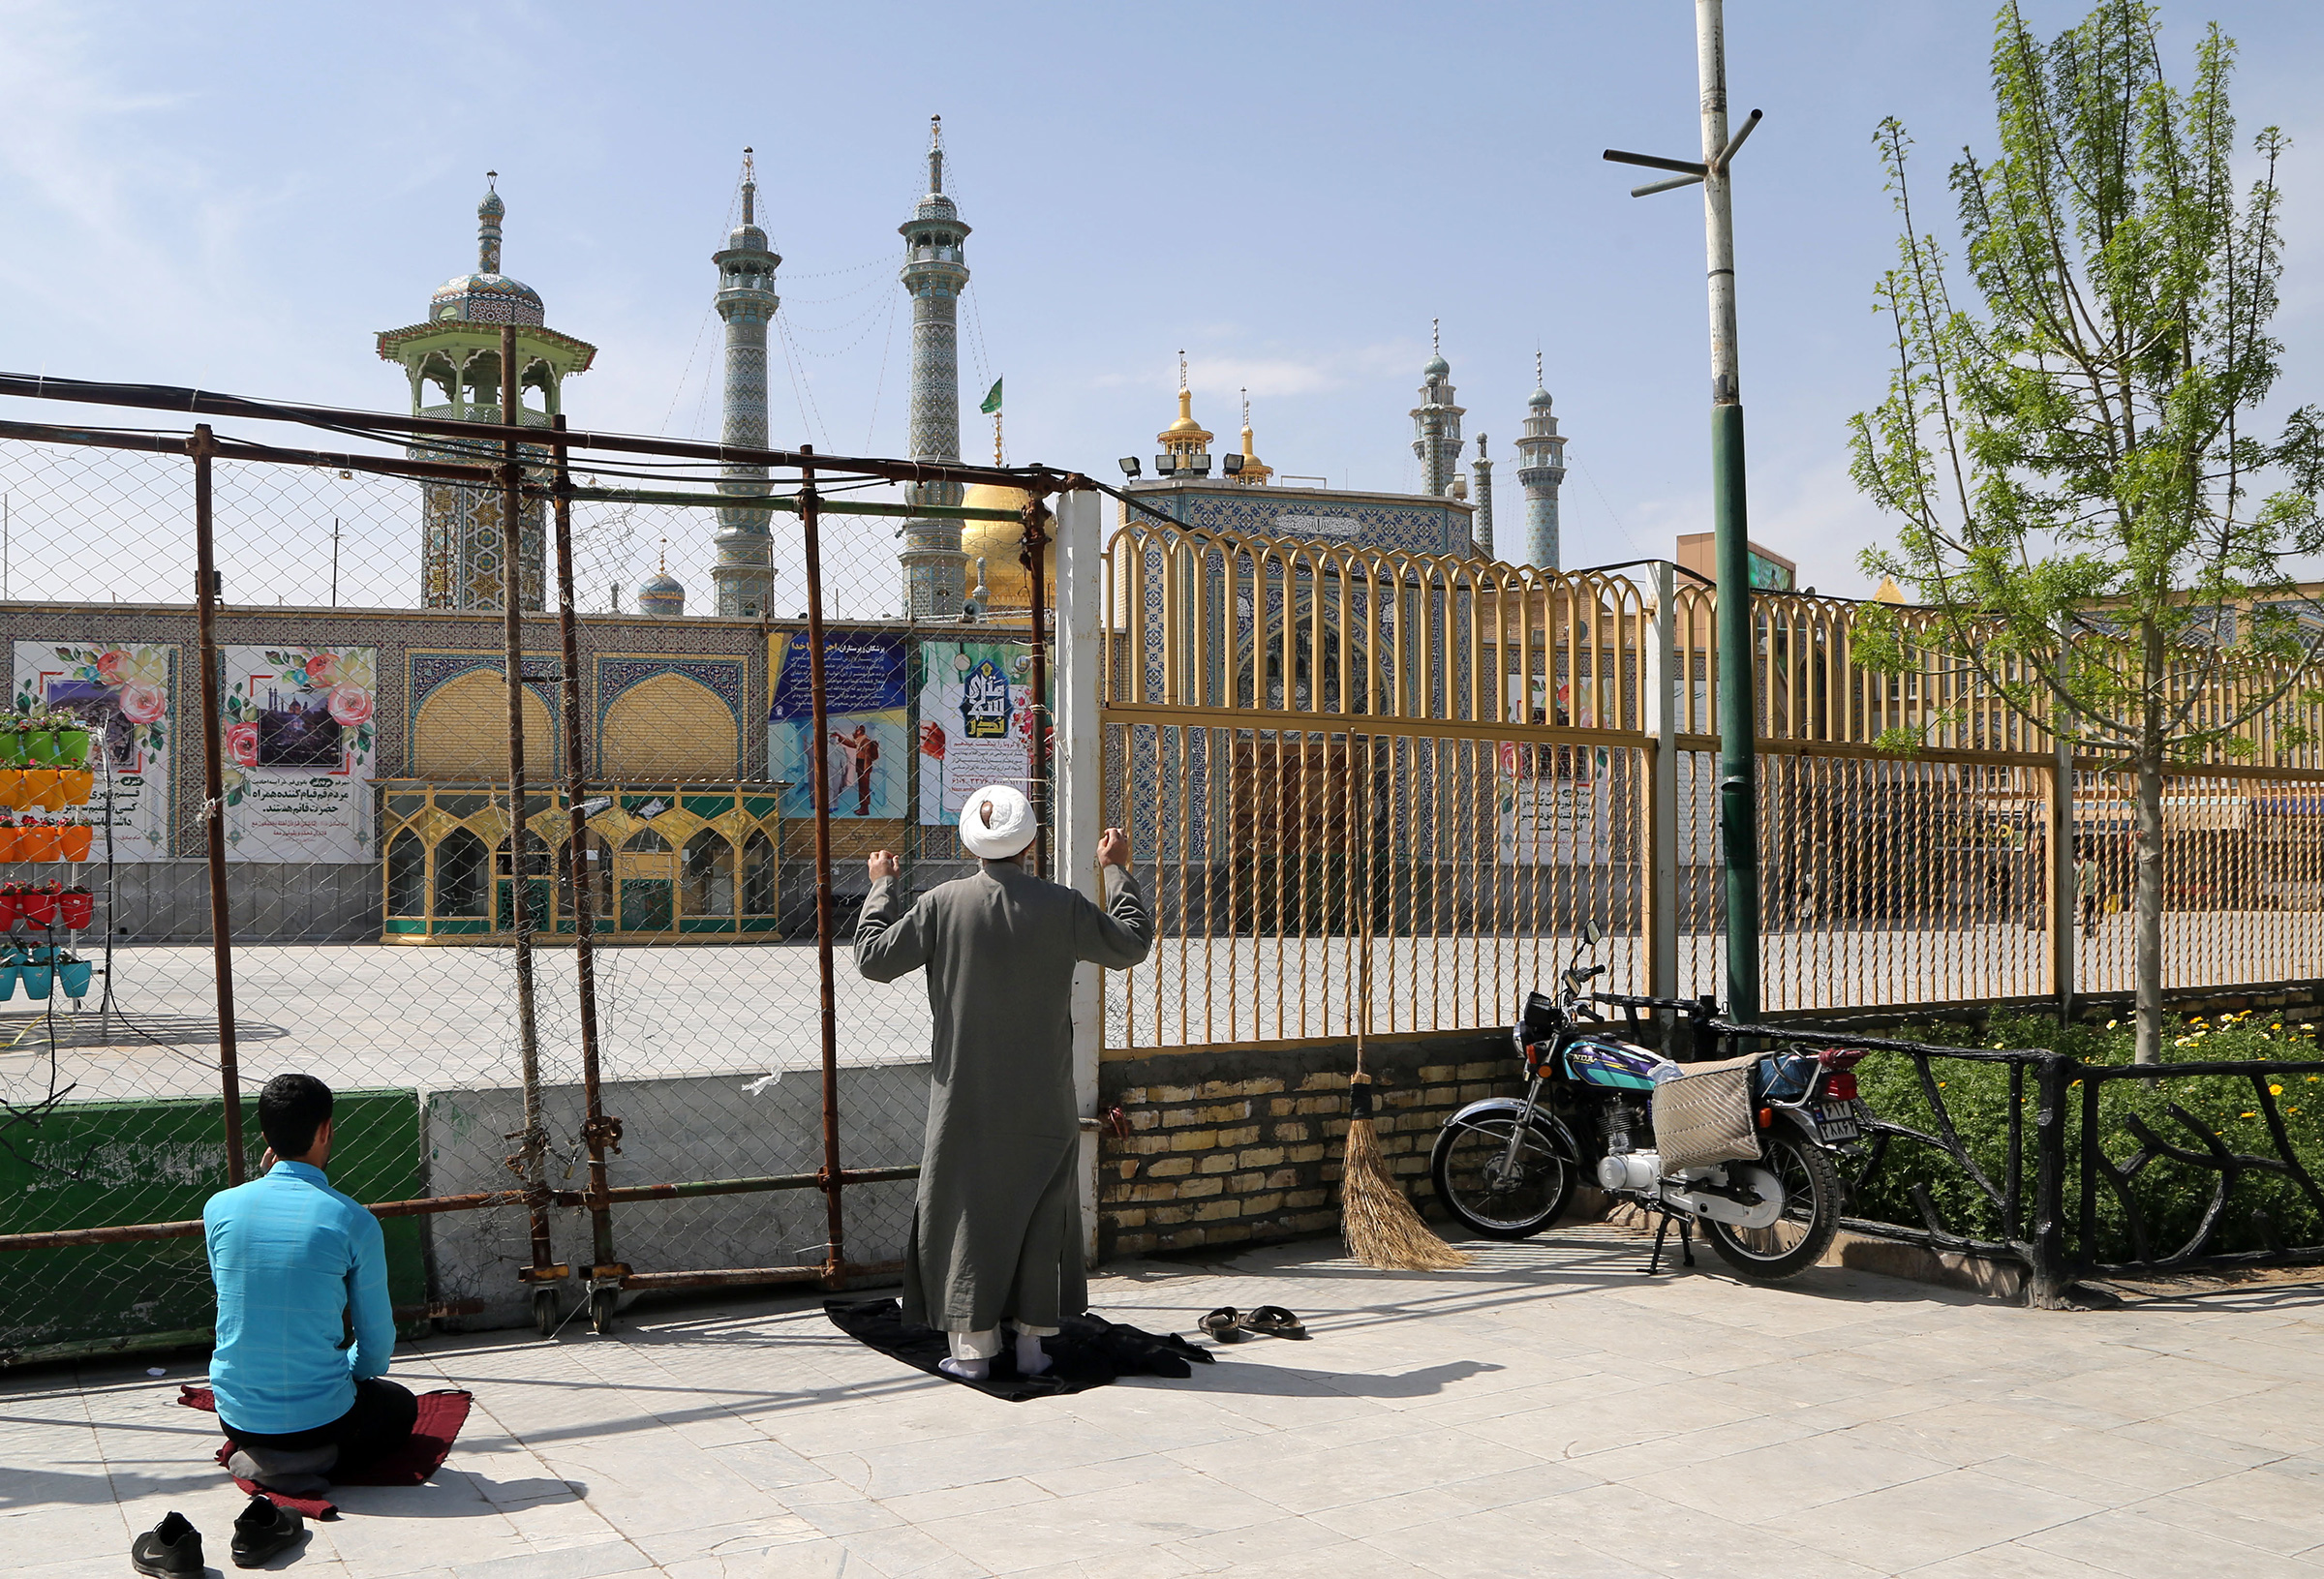 People continue to pray outside of Fatima Masumeh Shrine as it is closed for visitors due to the spread of COVID-19 in Qom, Iran on March 17. (Photo by Fatemah Bahrami—Anadolu Agency/Getty Images)